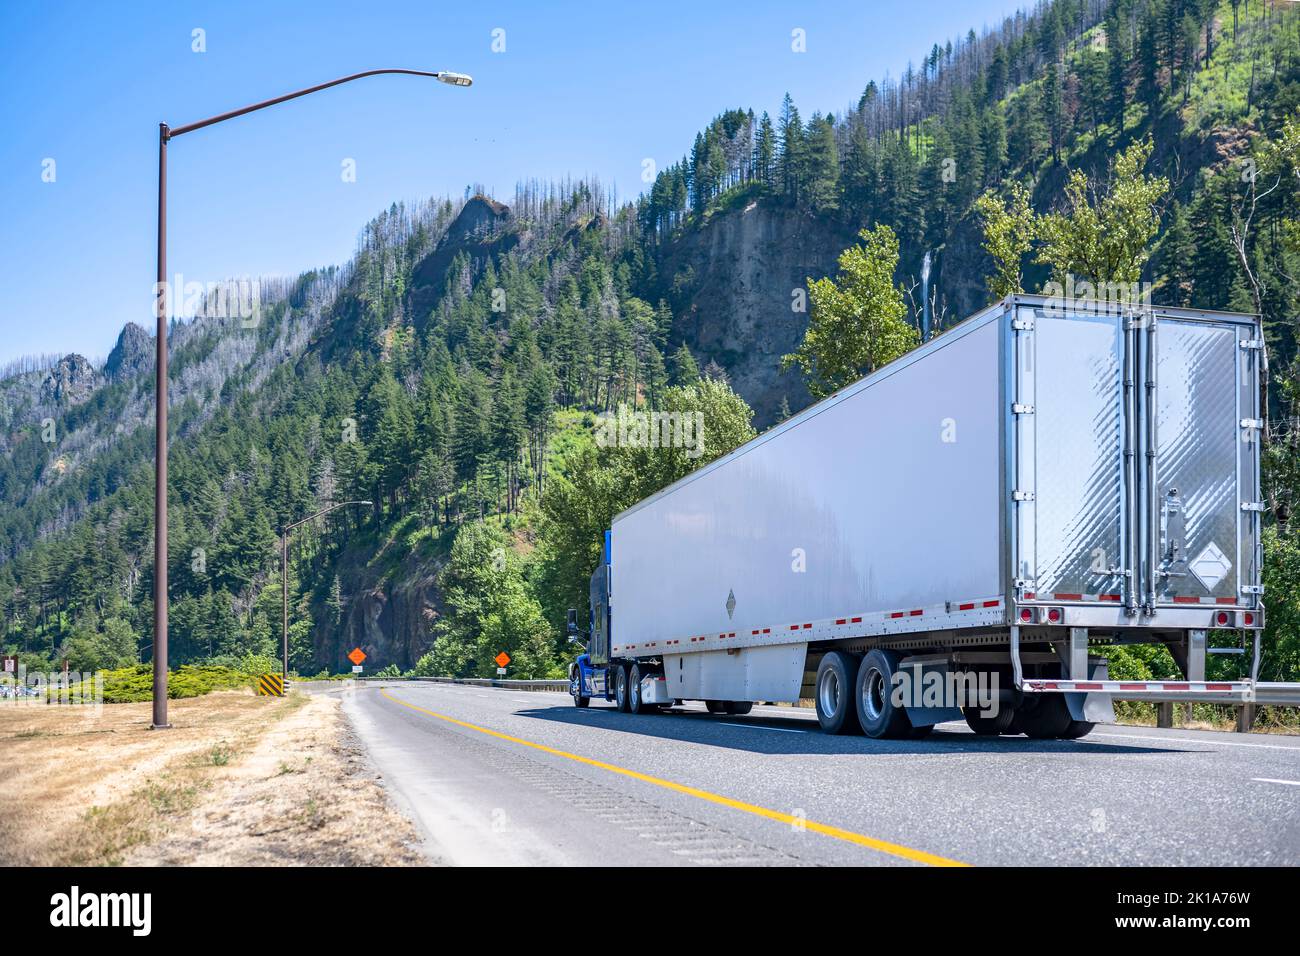 Classic blue long haul big rig semi truck tractor with chrome exhaust pipes transporting commercial cargo in refrigerator semi trailer moving on the h Stock Photo